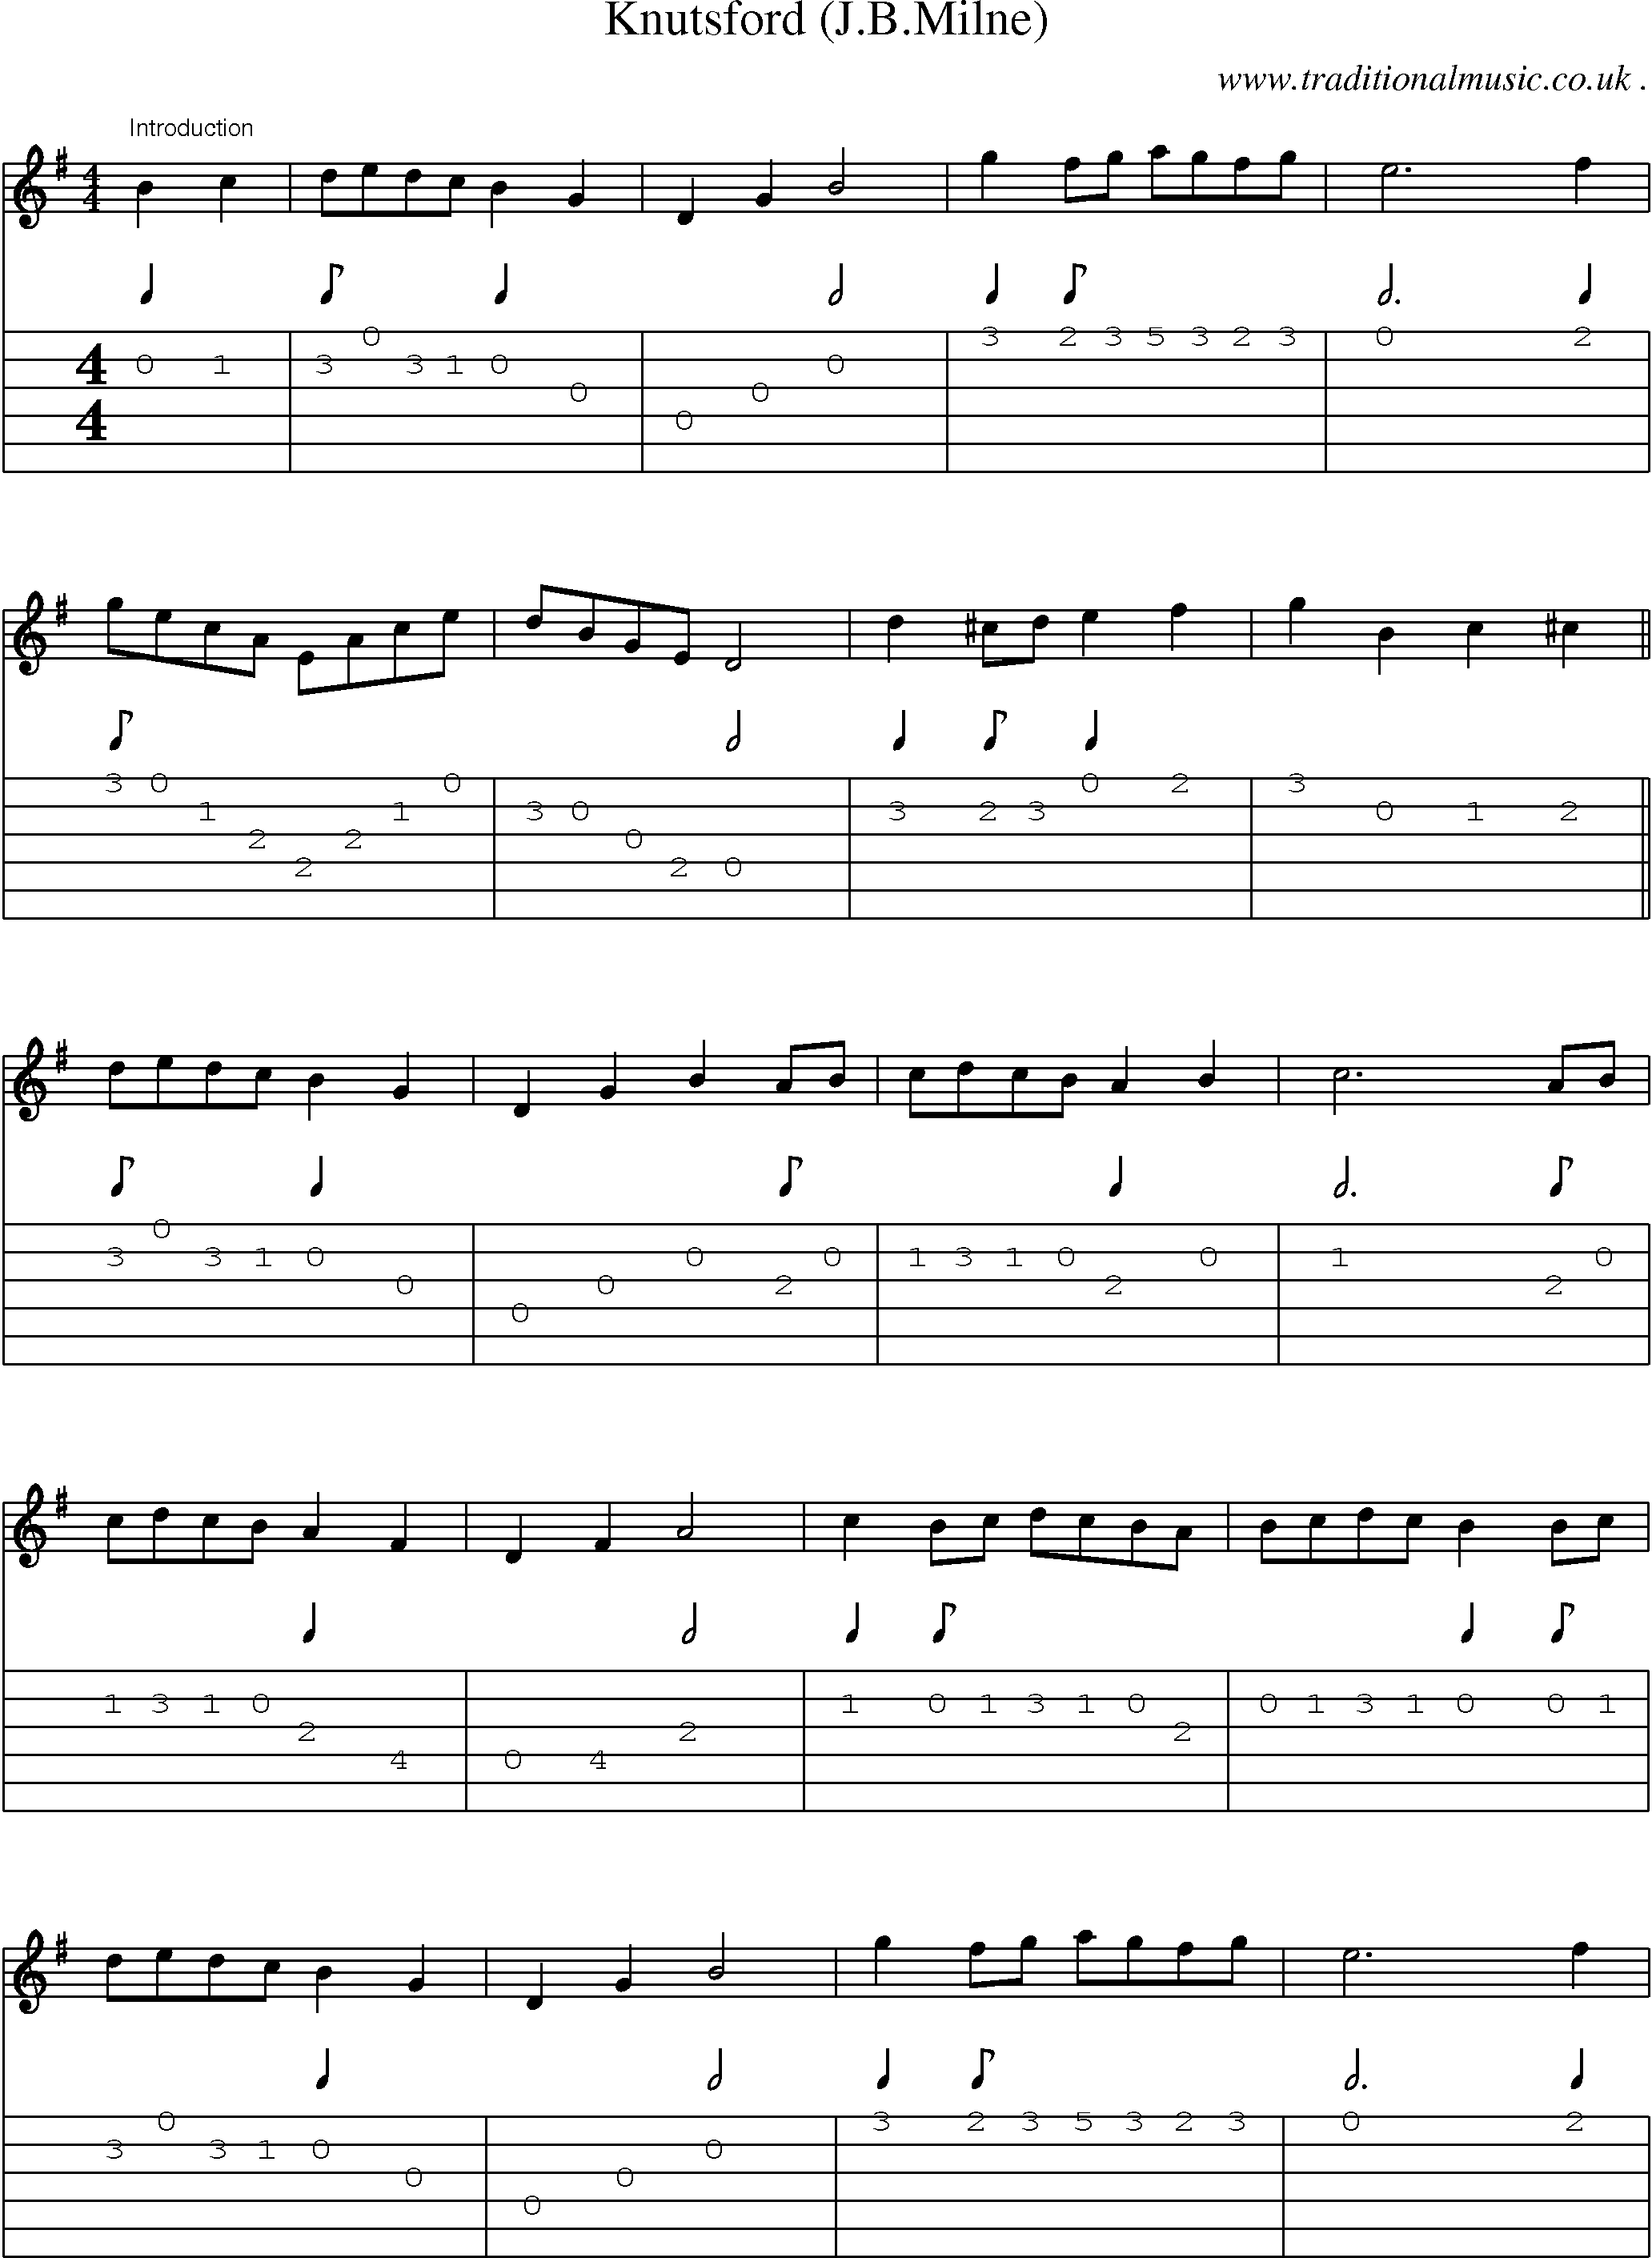 Sheet-Music and Guitar Tabs for Knutsford (jbmilne)